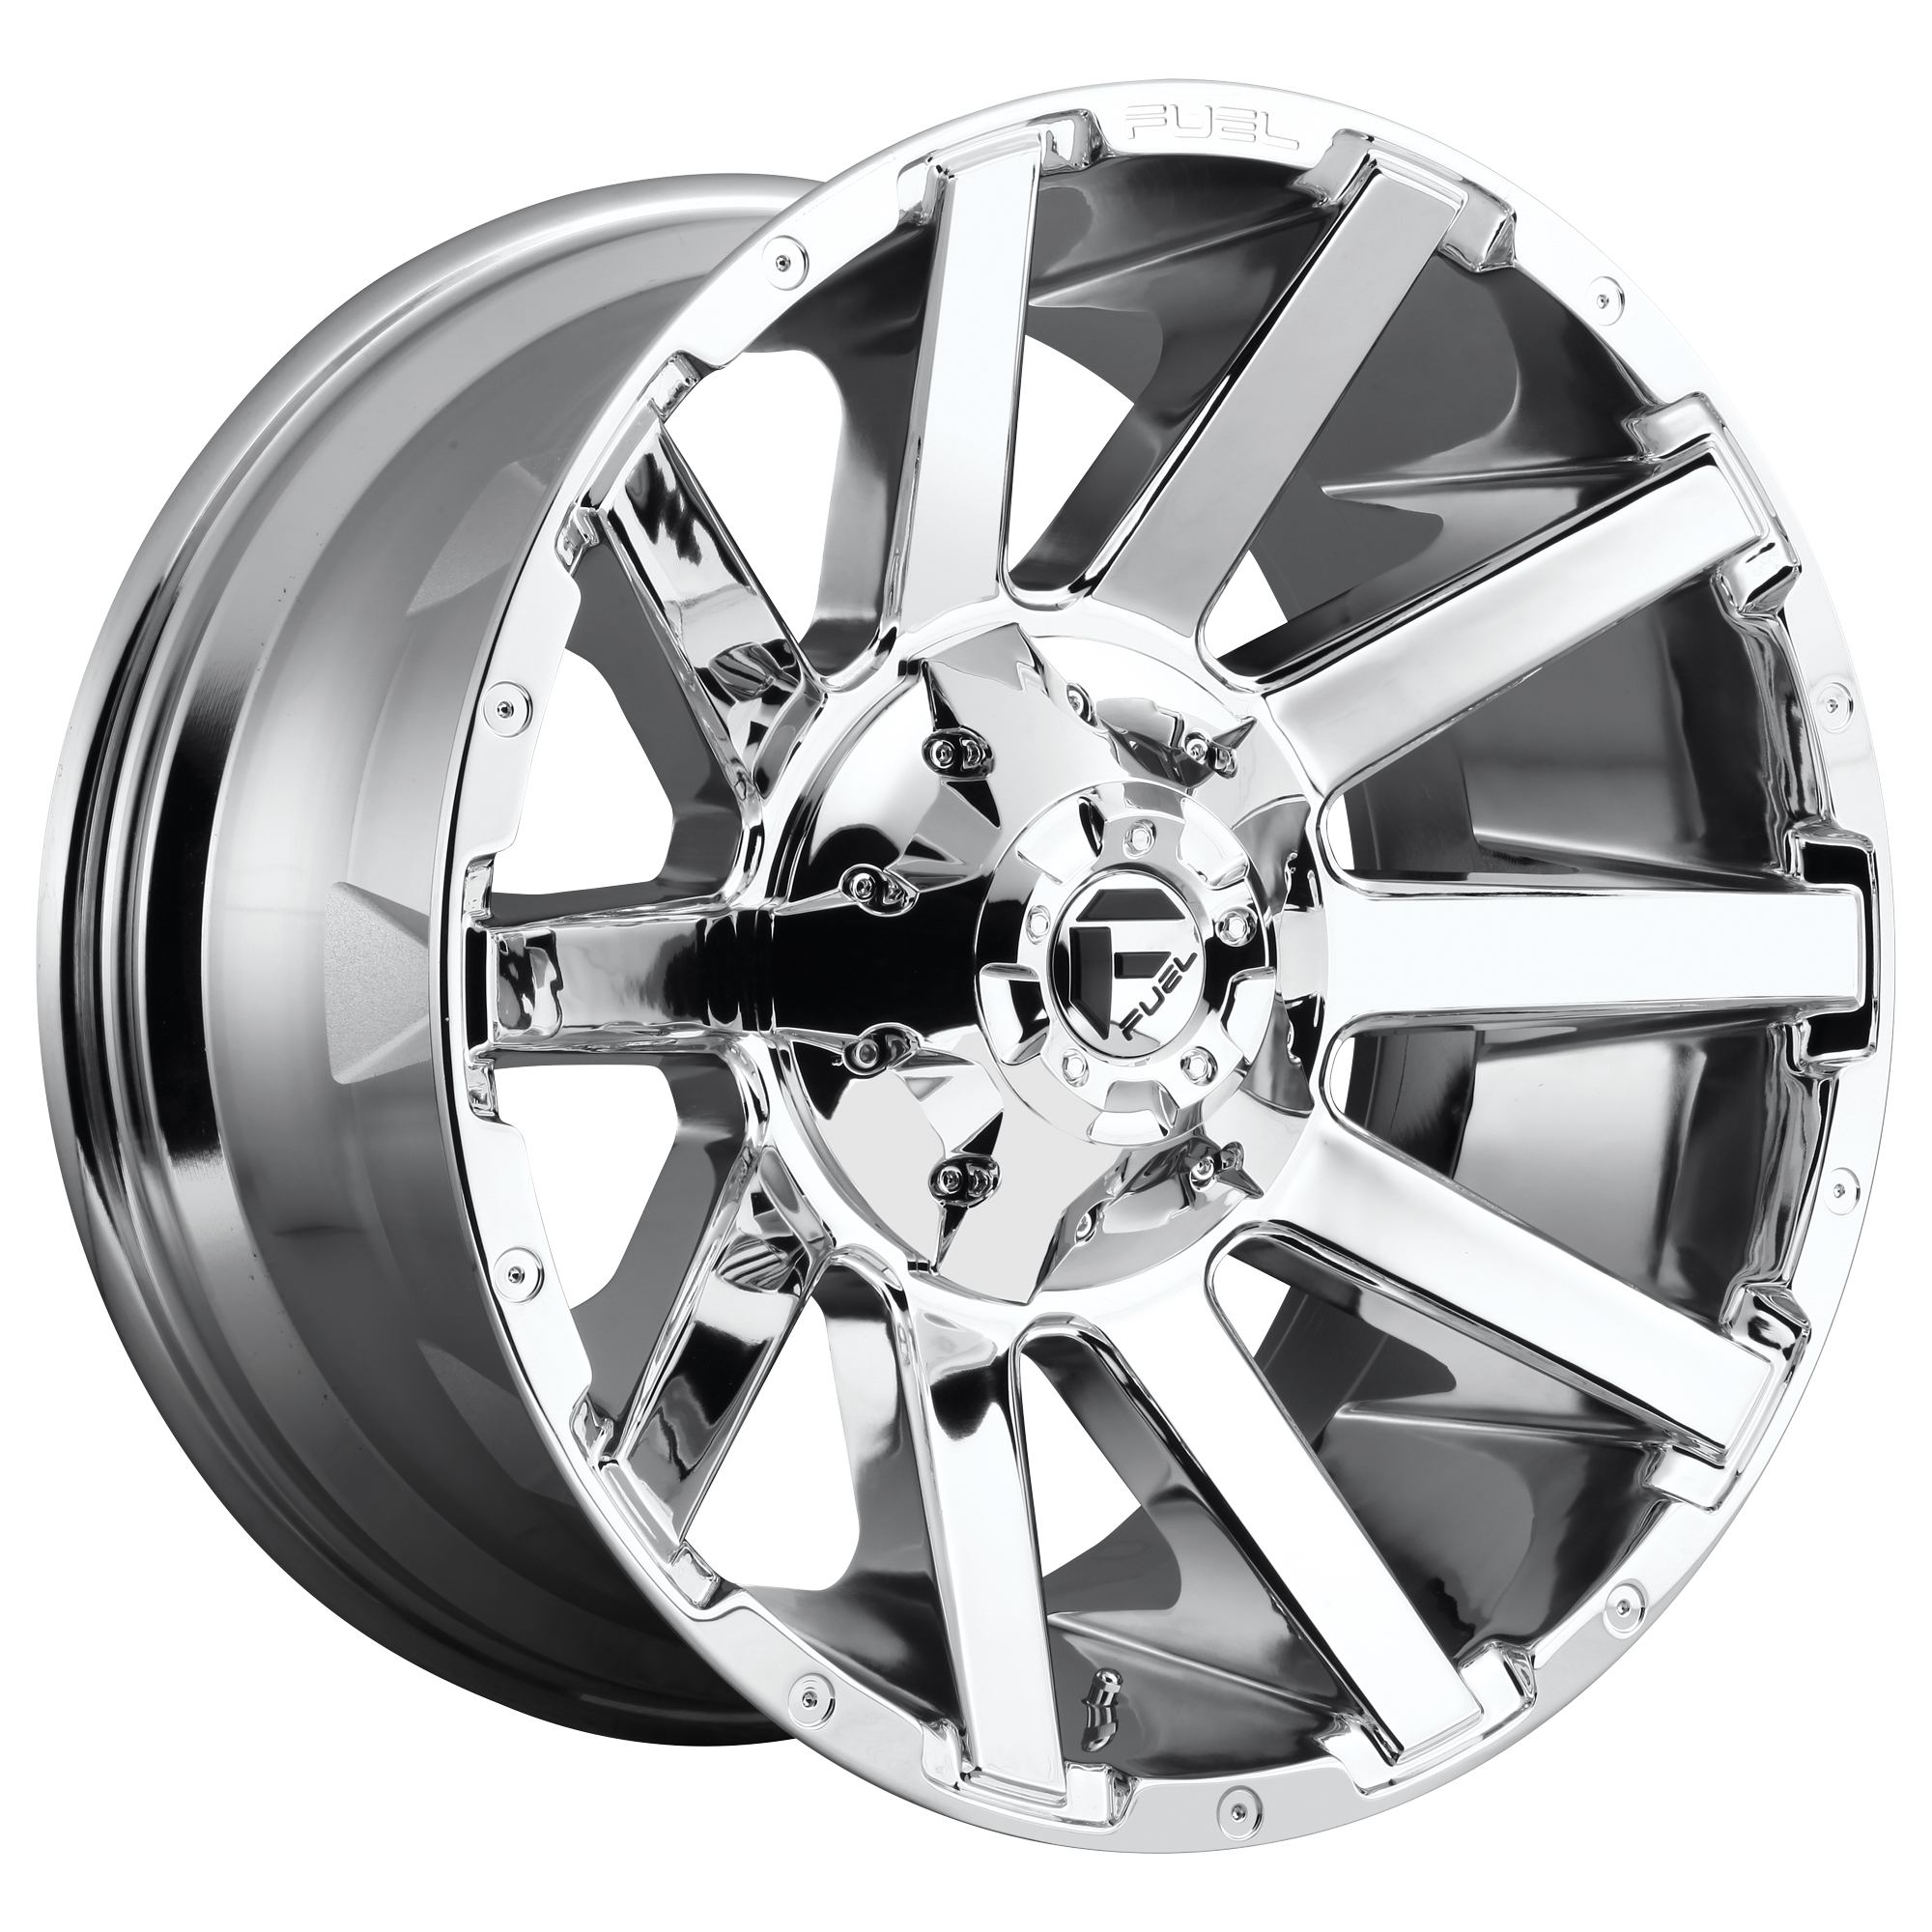 CONTRA 22x10 8x180.00 CHROME PLATED (-18 mm) - Tires and Engine Performance